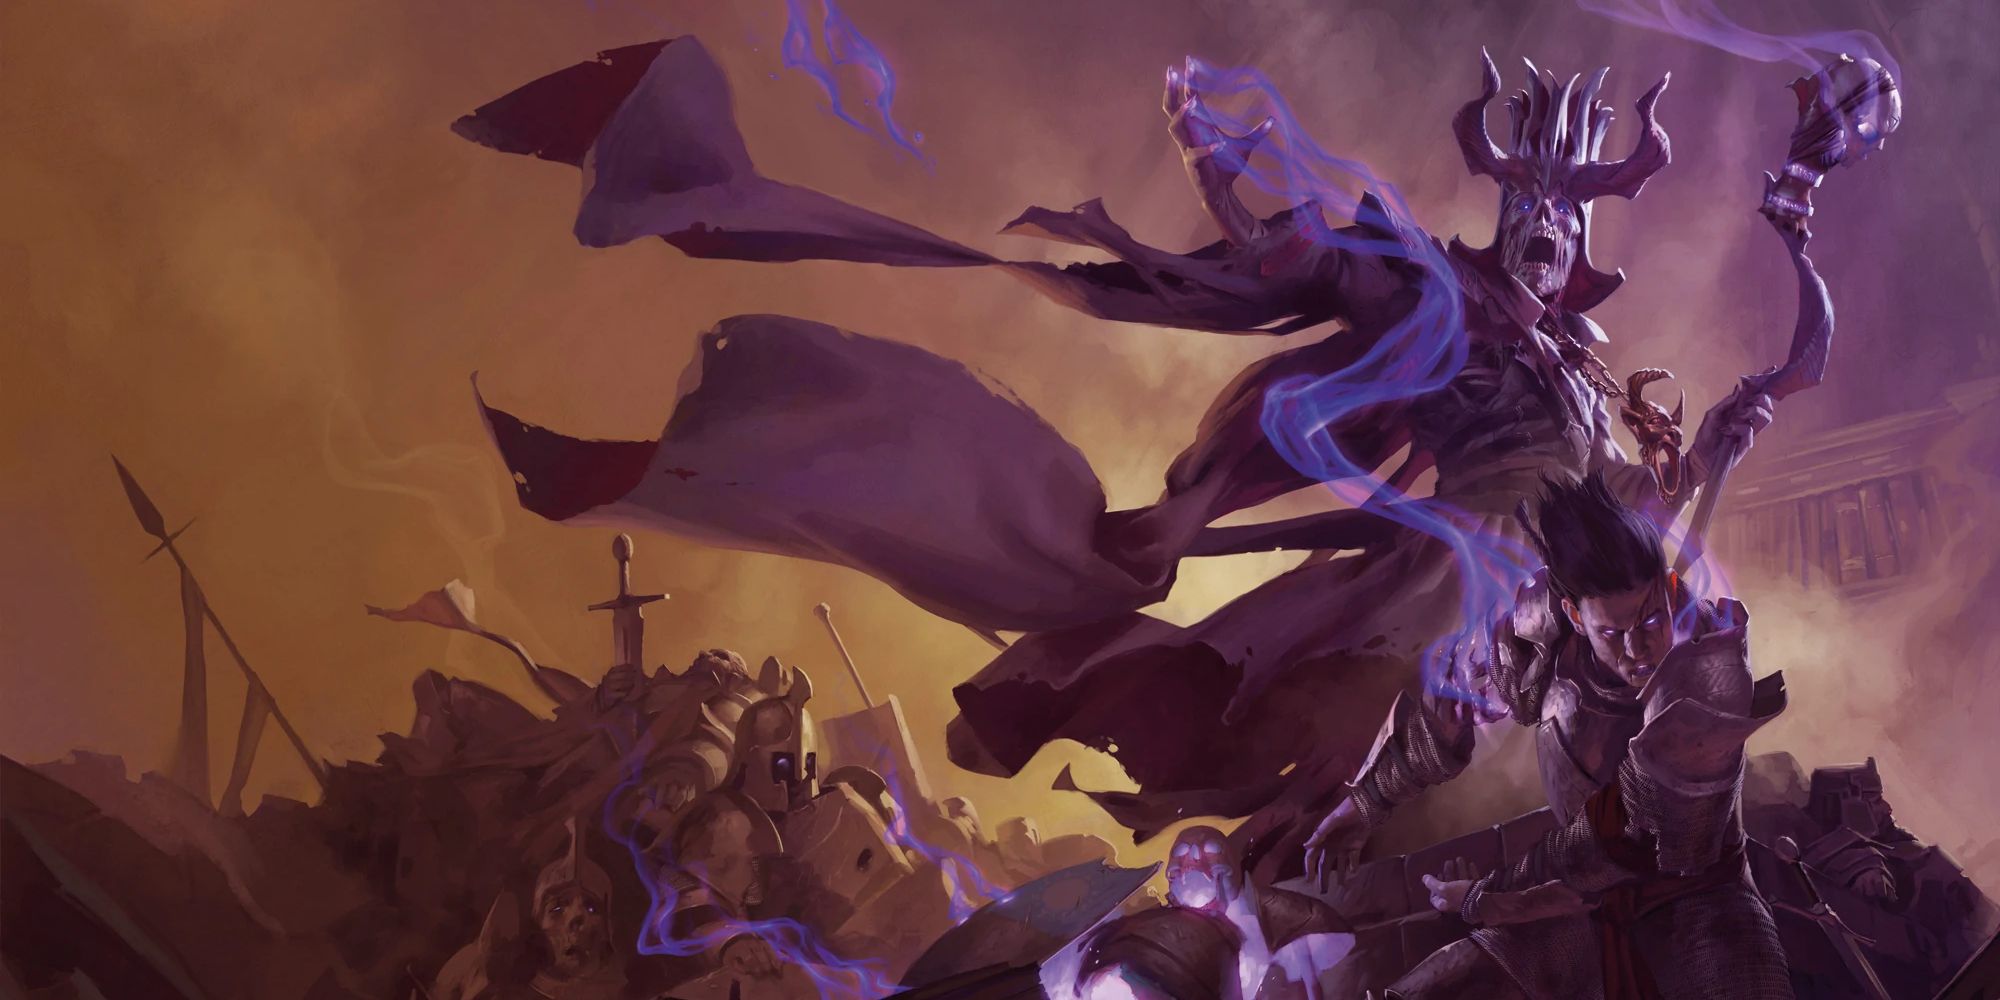 The demilich Acererak stands on a mountain of corpses as he channels purple energy through his hands and gnarled staff. 